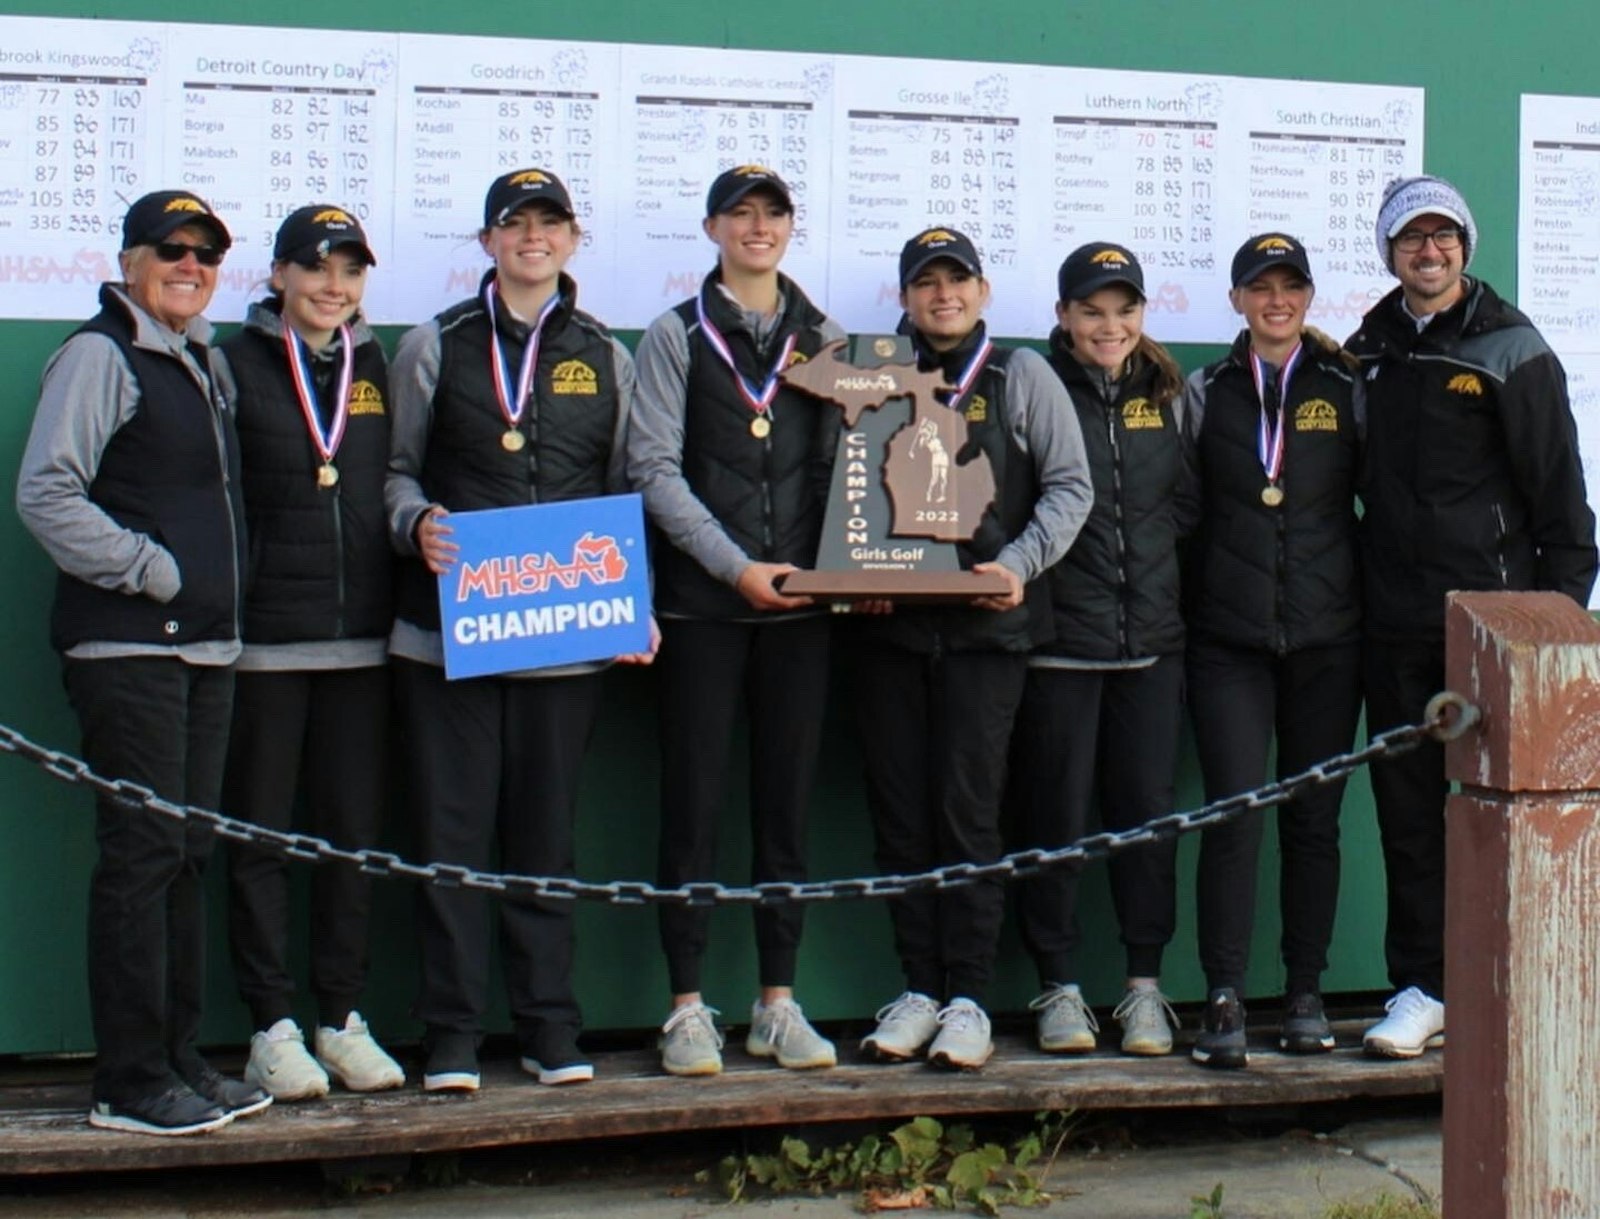 It’s all smiles for the Lutheran North girls golf team, Division 3 state champs. From left to right: Coach Lori Gill, Isabella Vincent, Saige Rothey, Lauren Timpf, Aileen Cosentino, Gabriella Cardenas, Mia Roe, Coach Alex Schlumps. The Mustangs also won in 2015 and 2016. (Photos provided by Lauren Timpf)